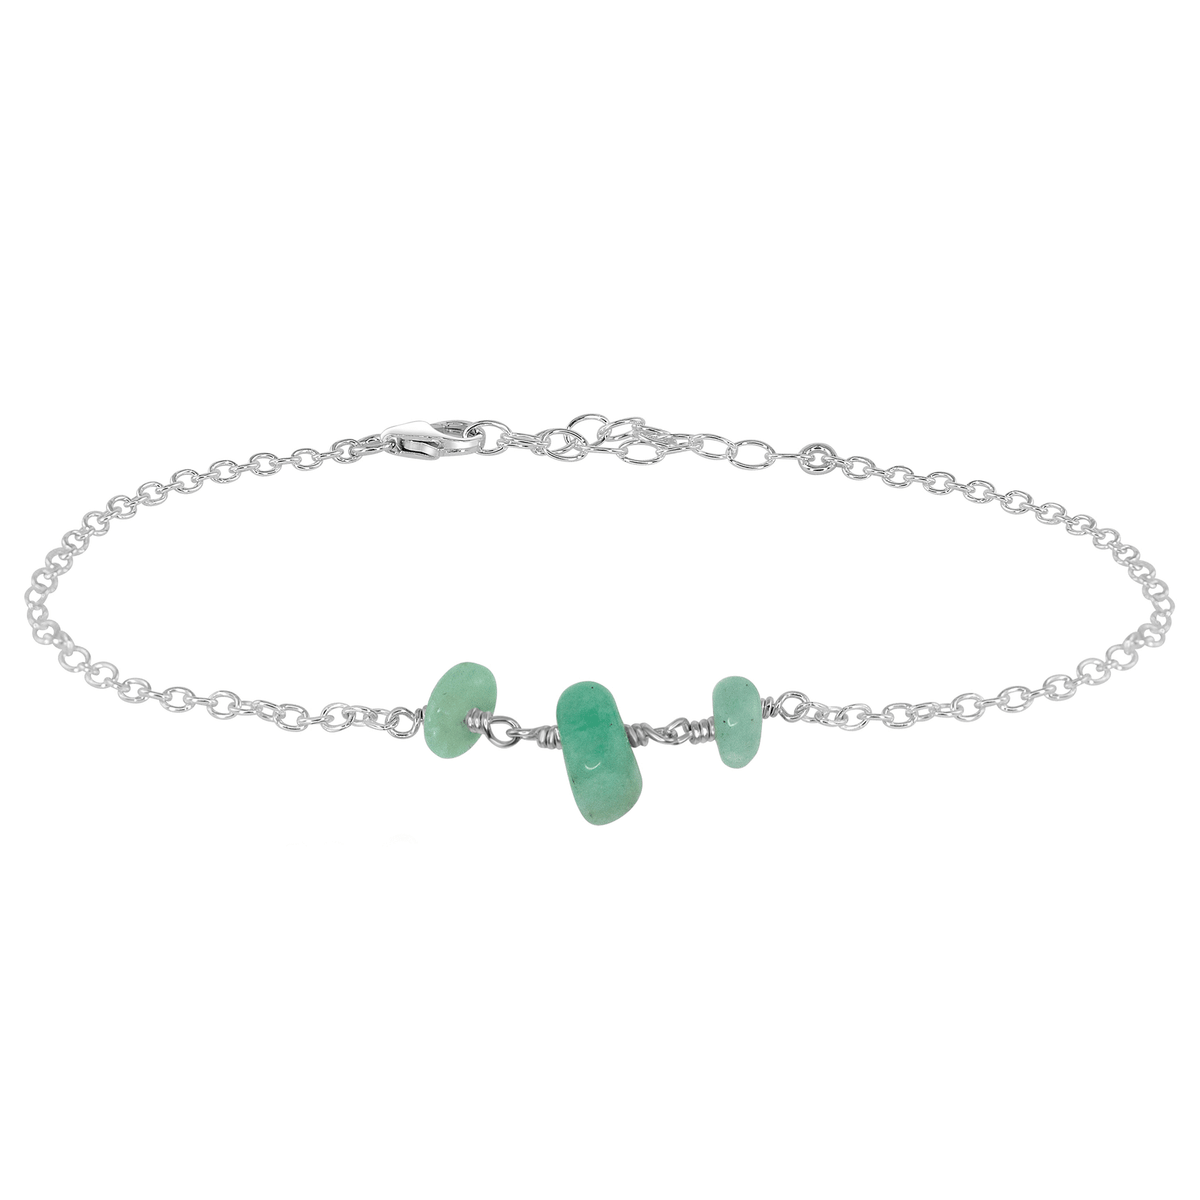 Beaded Chain Anklet - Amazonite - Sterling Silver - Luna Tide Handmade Jewellery